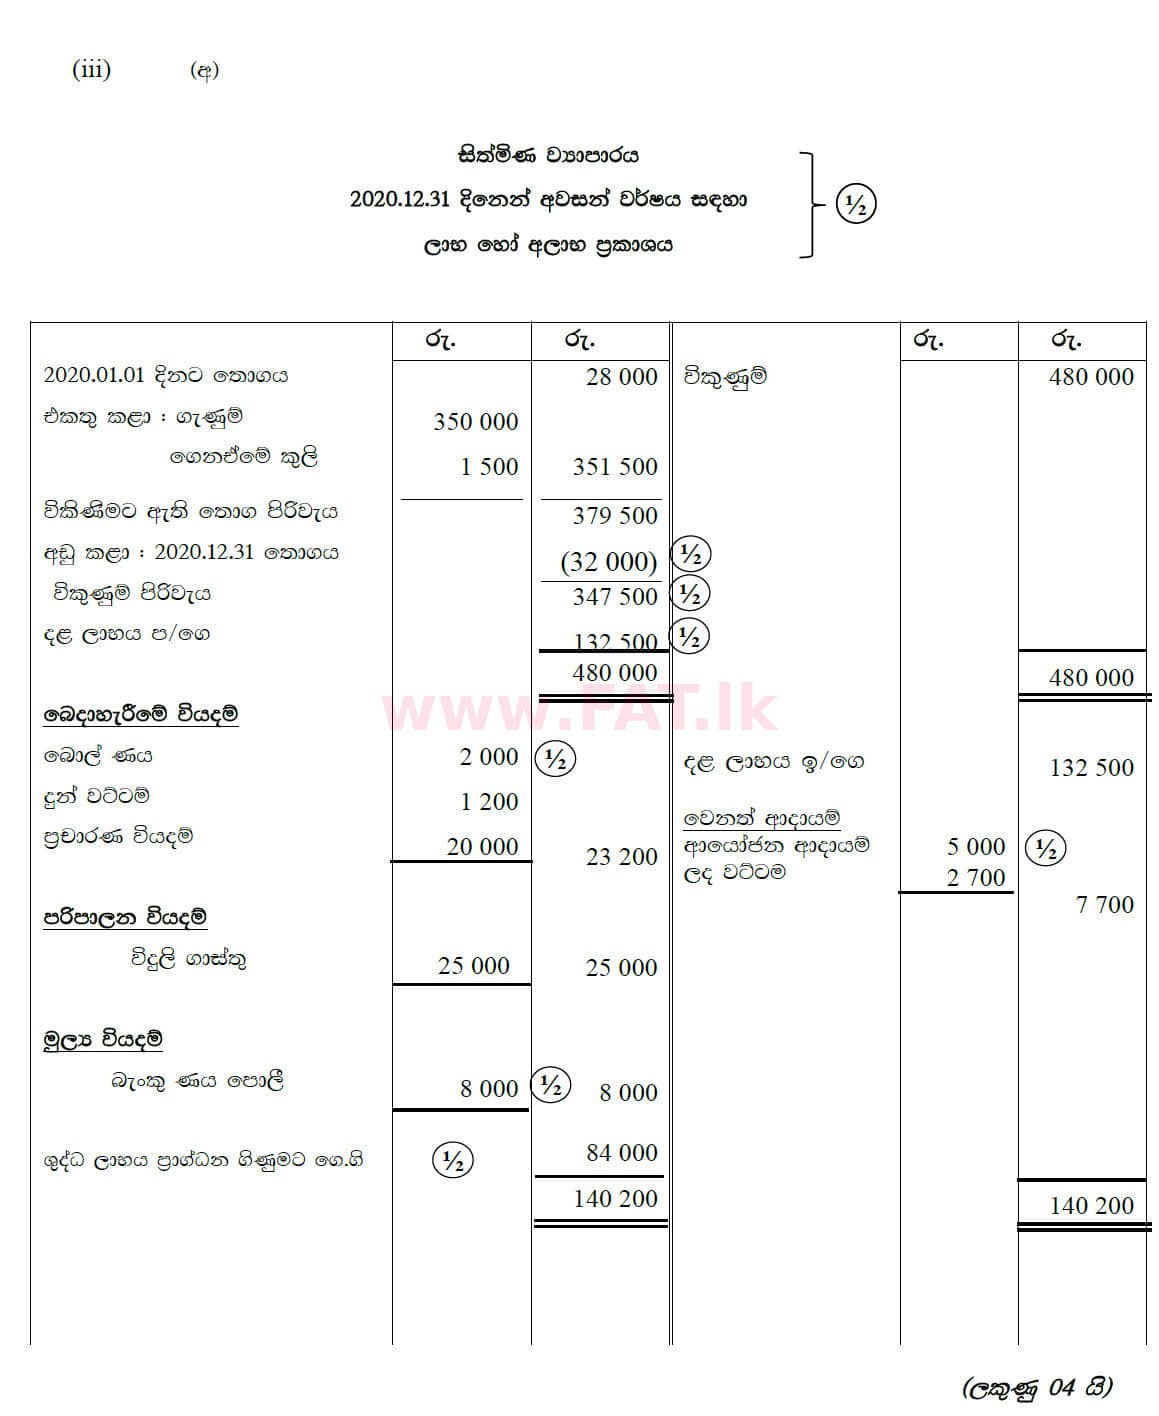 National Syllabus : Ordinary Level (O/L) Business and Accounting Studies - 2020 March - Paper II (සිංහල Medium) 7 5772